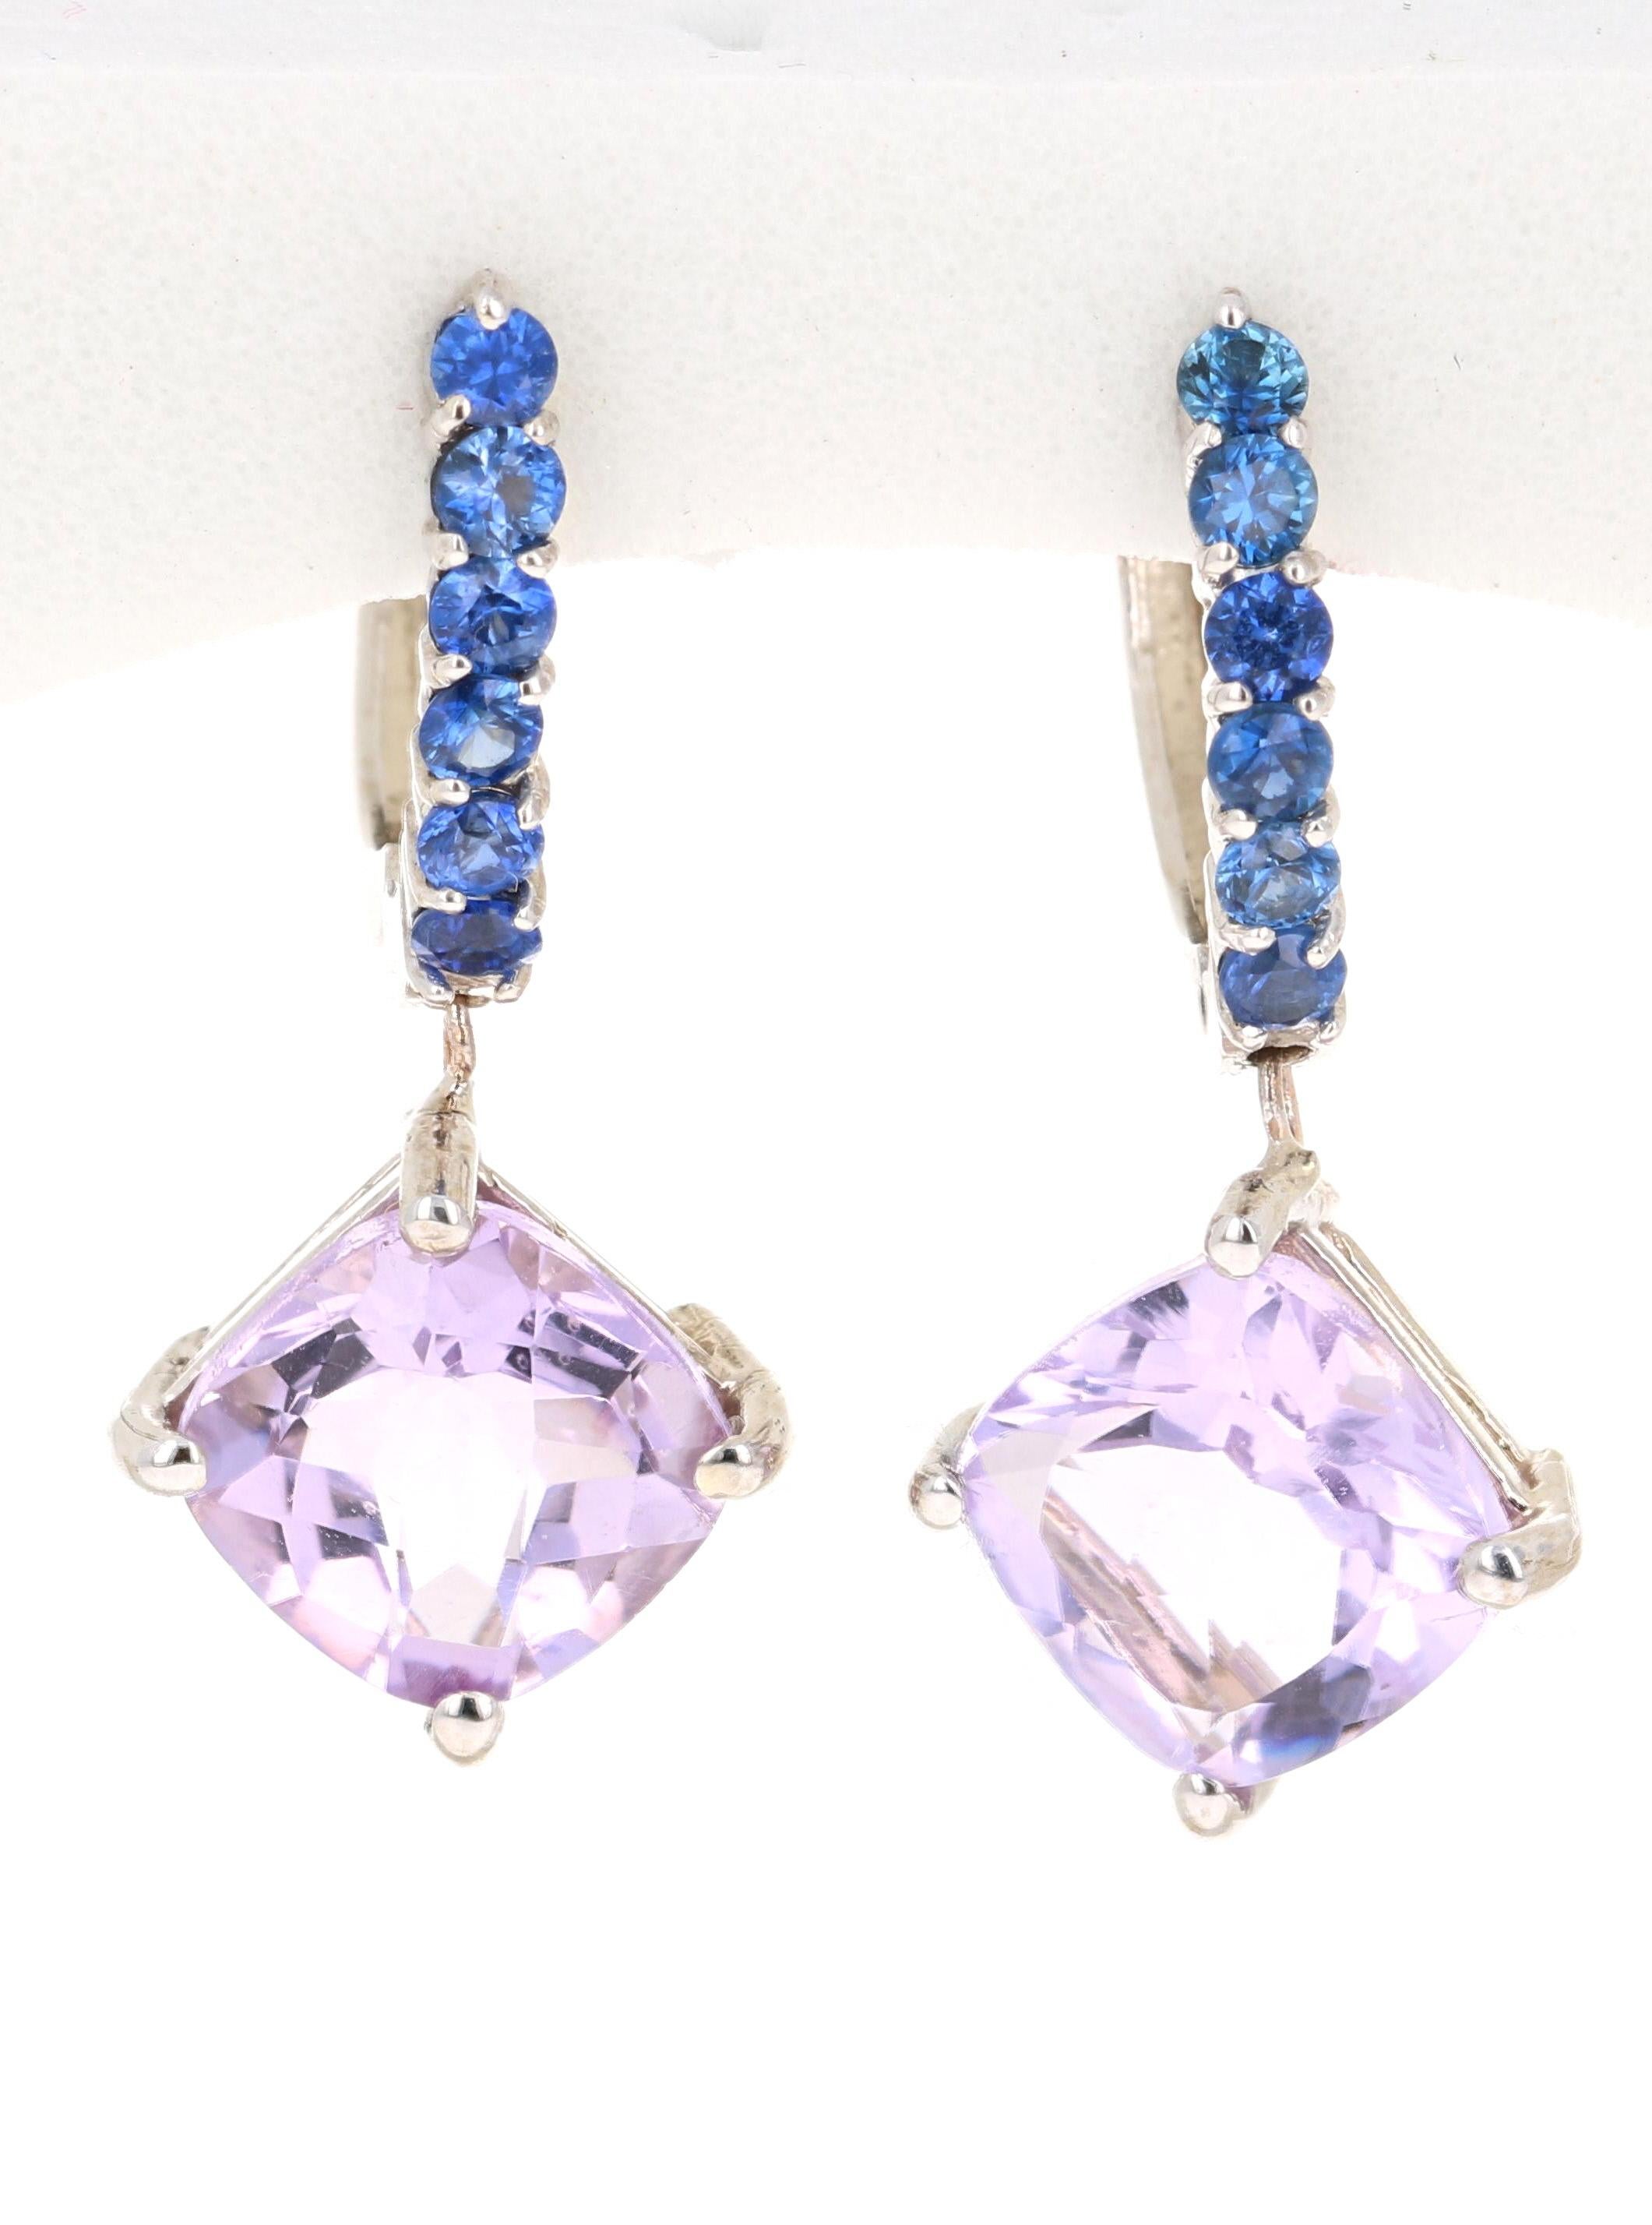 Amethyst and Blue Sapphire Drop Earrings! 

These stunning earrings have 2 Amethysts that weigh 4.10 Carats and are embellished with 12 Blue Sapphires that weigh 0.59 Carats. The total carat weight of the earrings are 4.69 Carats. 

They are